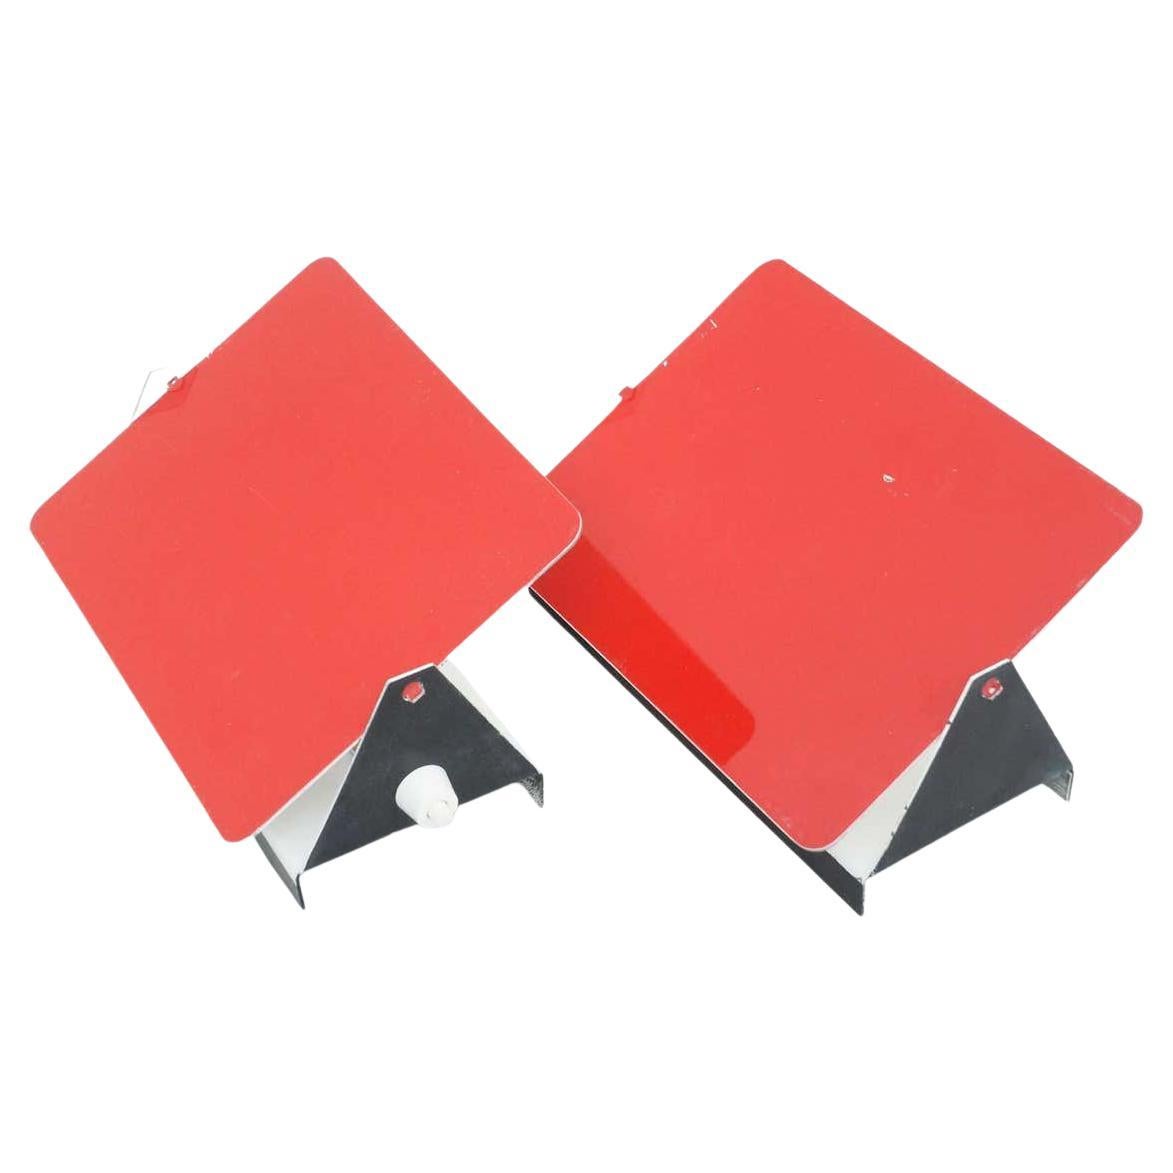 Pair of Charlotte Perriand, Mid-Century Modern Red Metal Cp-1 Wall Light, 1960